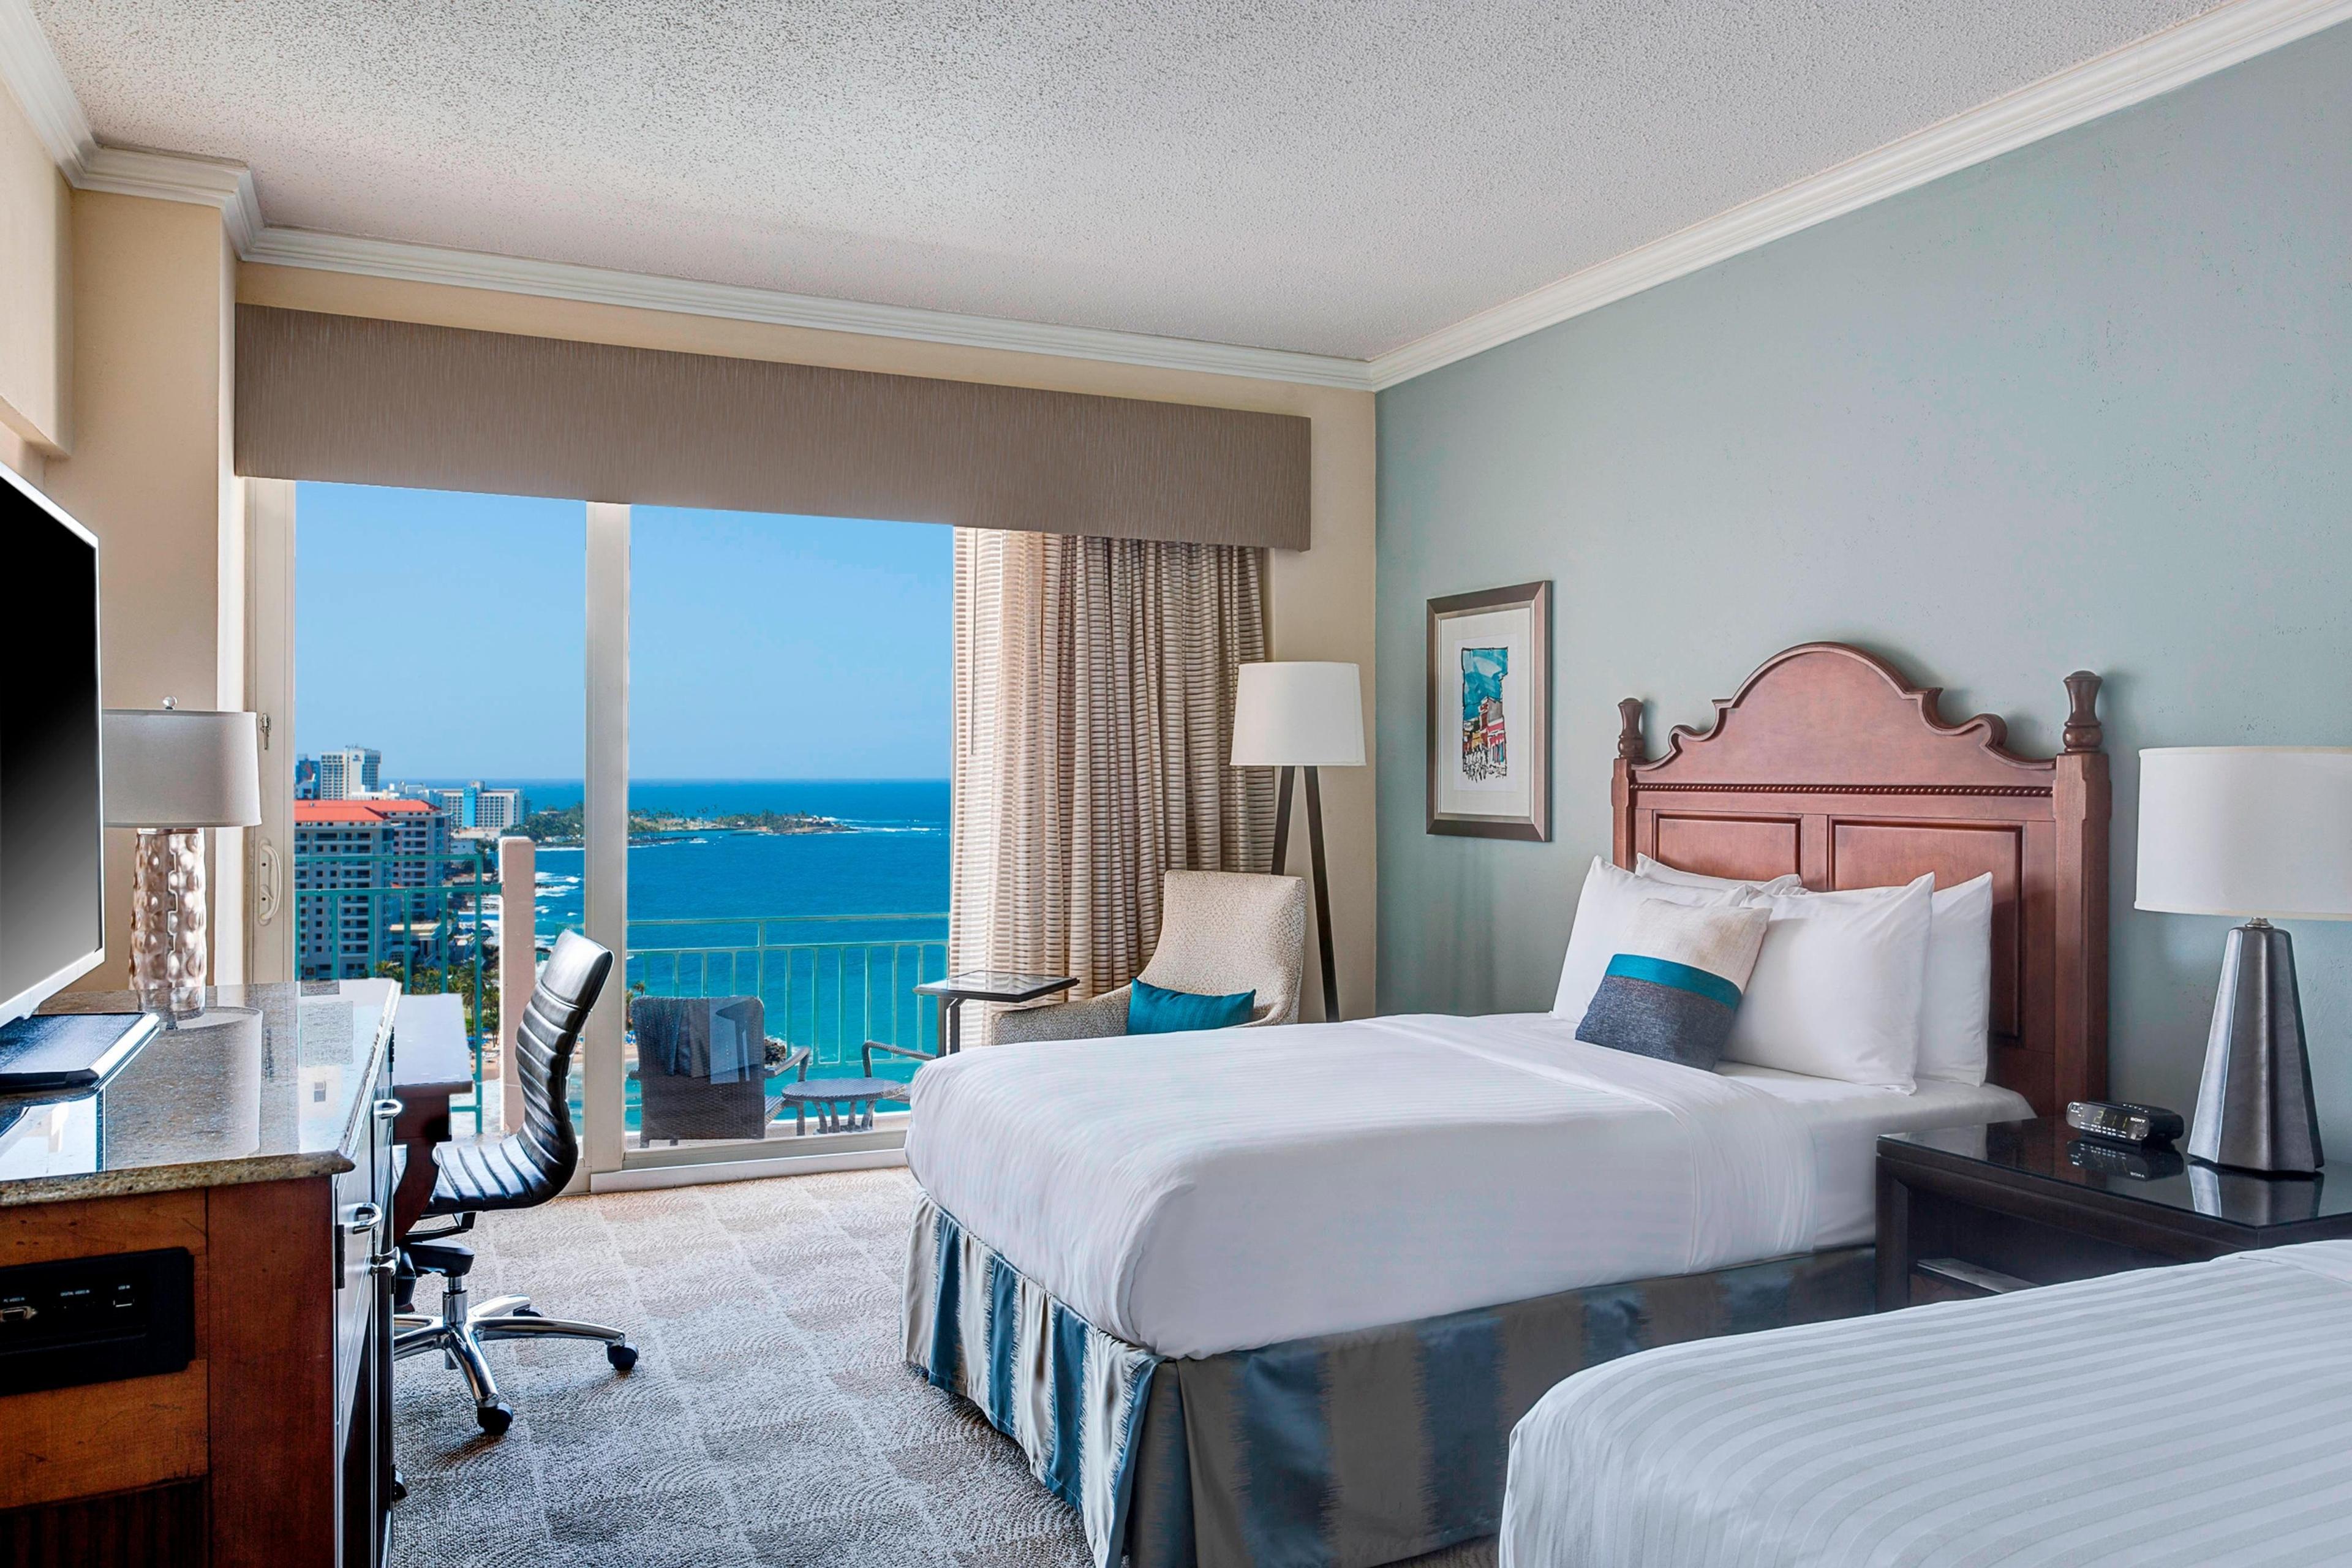 Take in the scenic ocean views from well-appointed guest rooms with modern amenities. Flat-screen HDTVs with jack packs and device compatibility keep our guests well entertained.